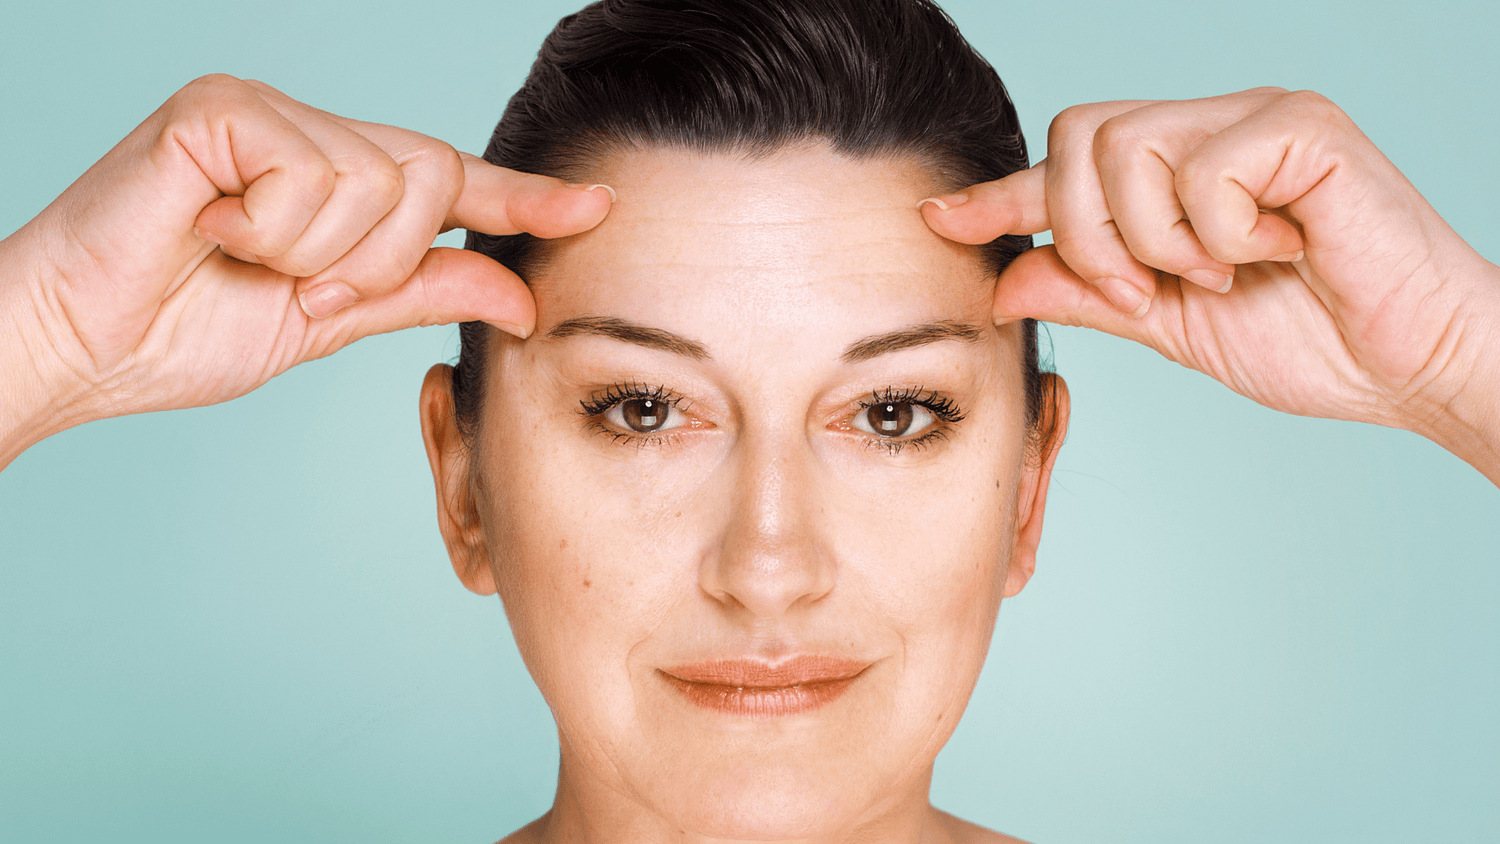 Home remedies to reduce wrinkles